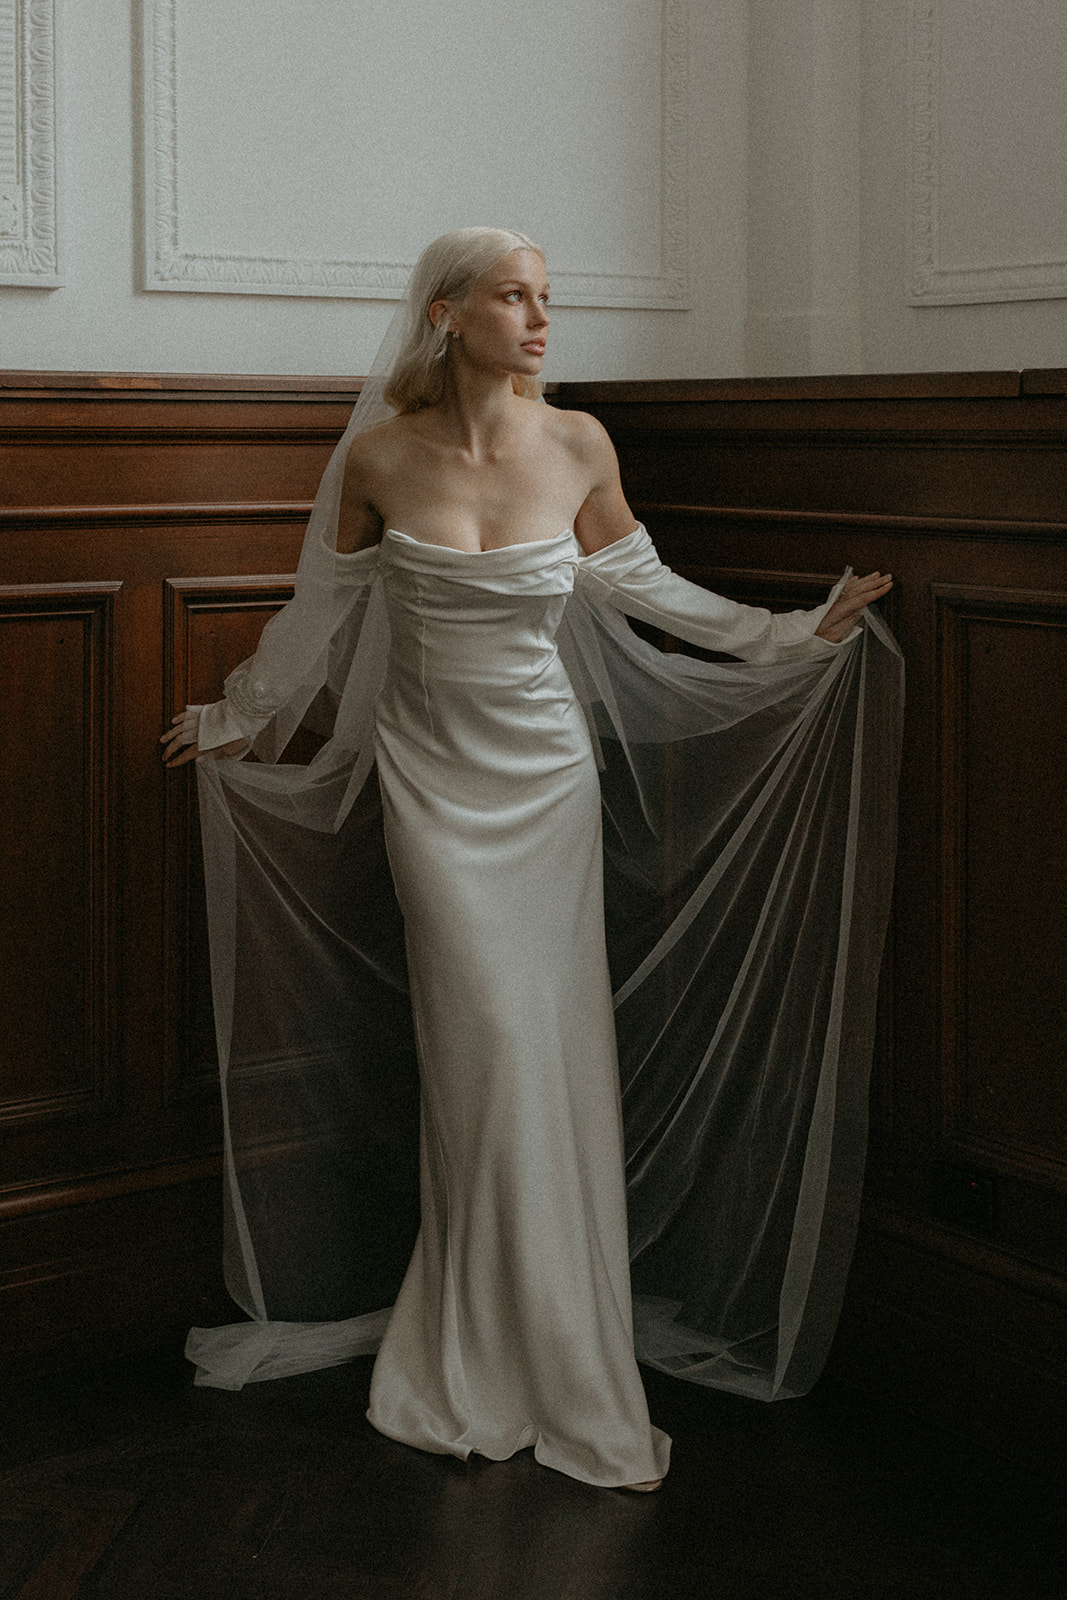 Artistic model looking elegantly in her sheering gown in a historic venue